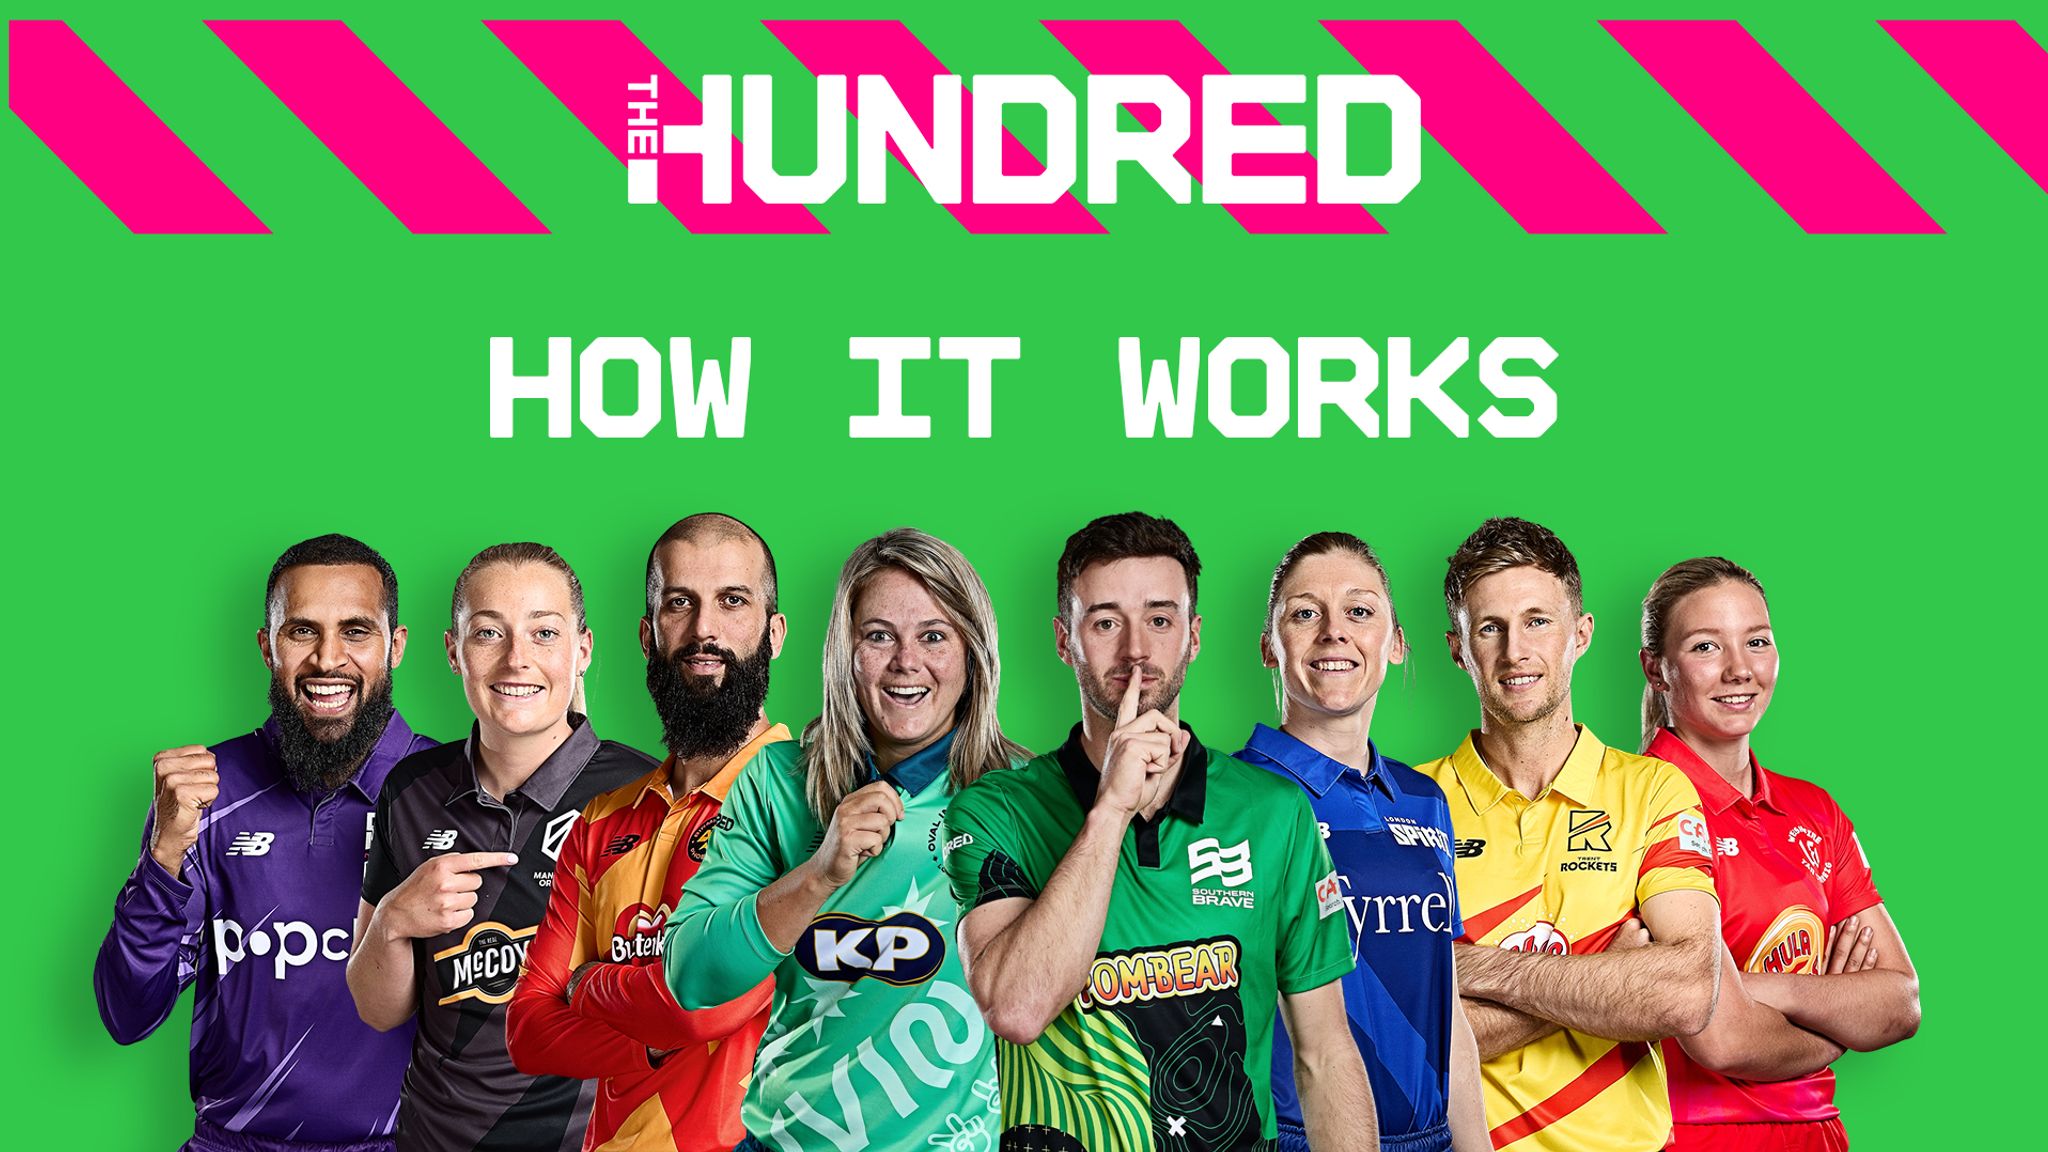 The Hundred How does the tournament work? What were the top stats from 2021 edition? Cricket